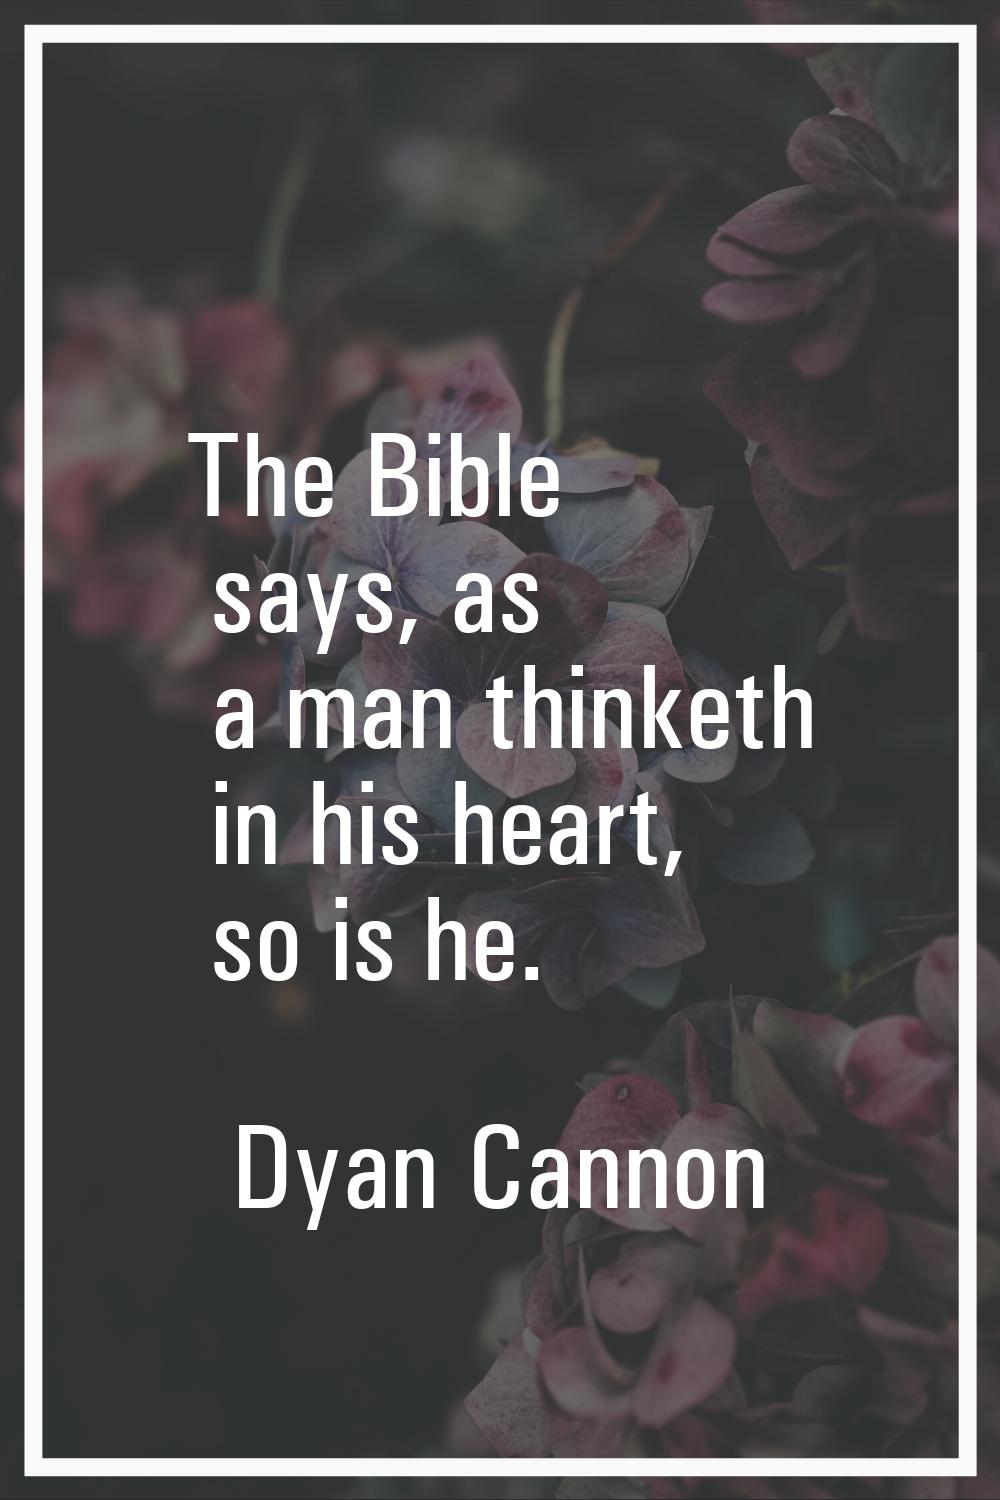 The Bible says, as a man thinketh in his heart, so is he.